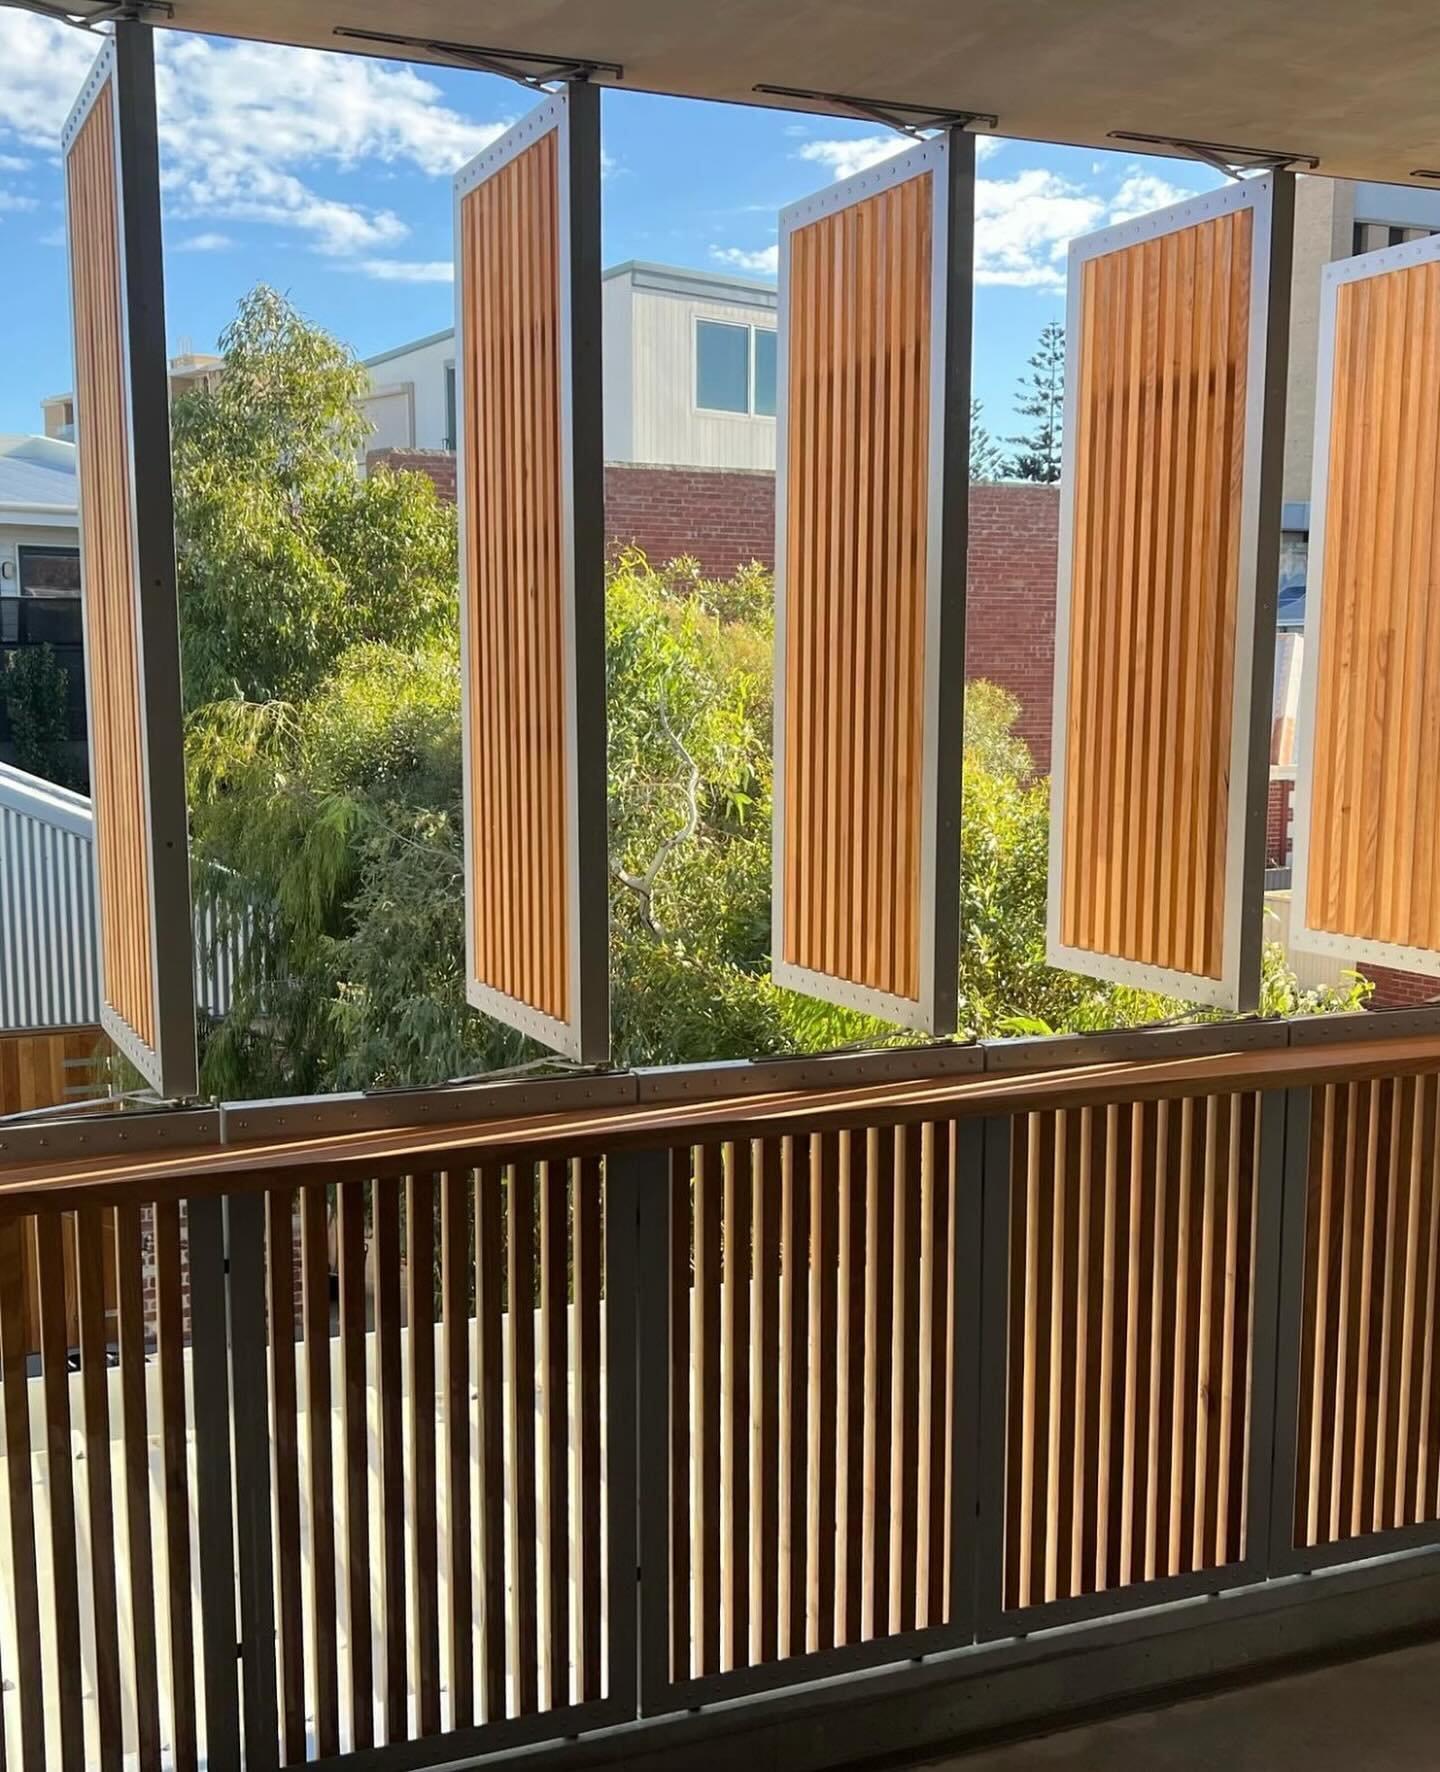 REPOST | @cockburnjoinerymyaree Classic but stylish timber shutters for a home in Fremantle. The powder coated vertical battens framed with metal add a sense of depth and texture to the sleek design.
This style of shutters also allows for easy adjust